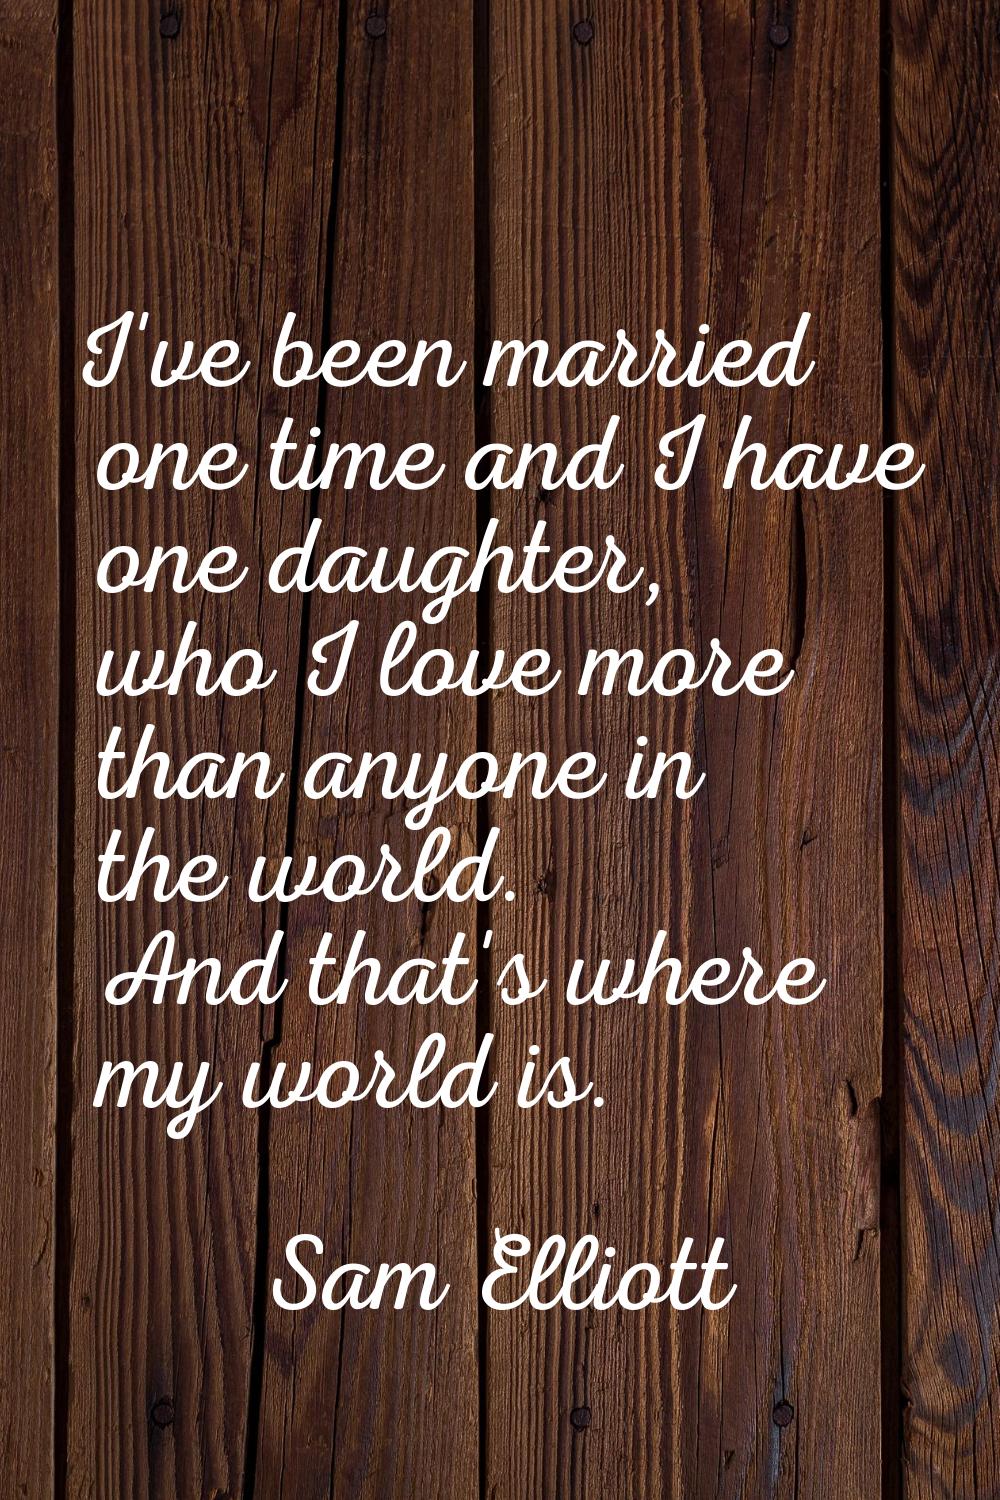 I've been married one time and I have one daughter, who I love more than anyone in the world. And t